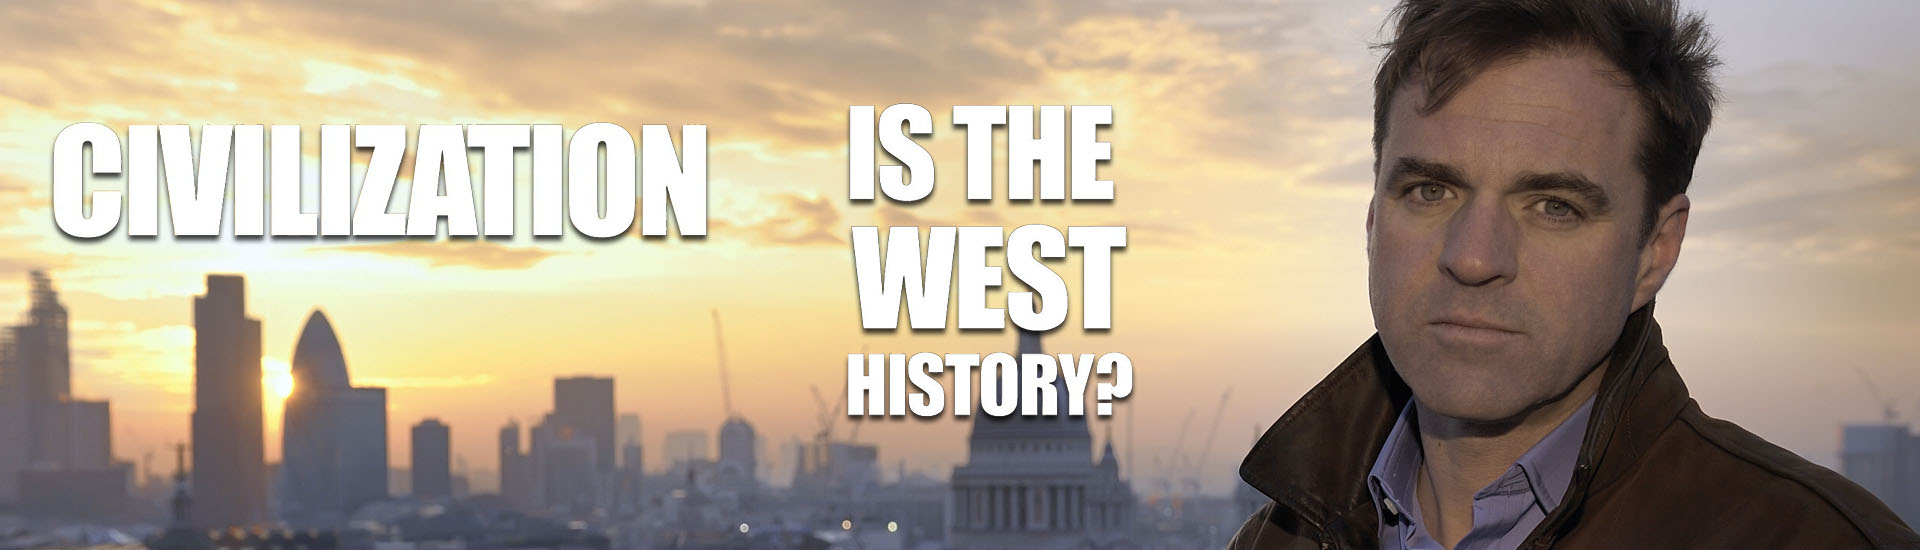 Civilization: Is the West History?